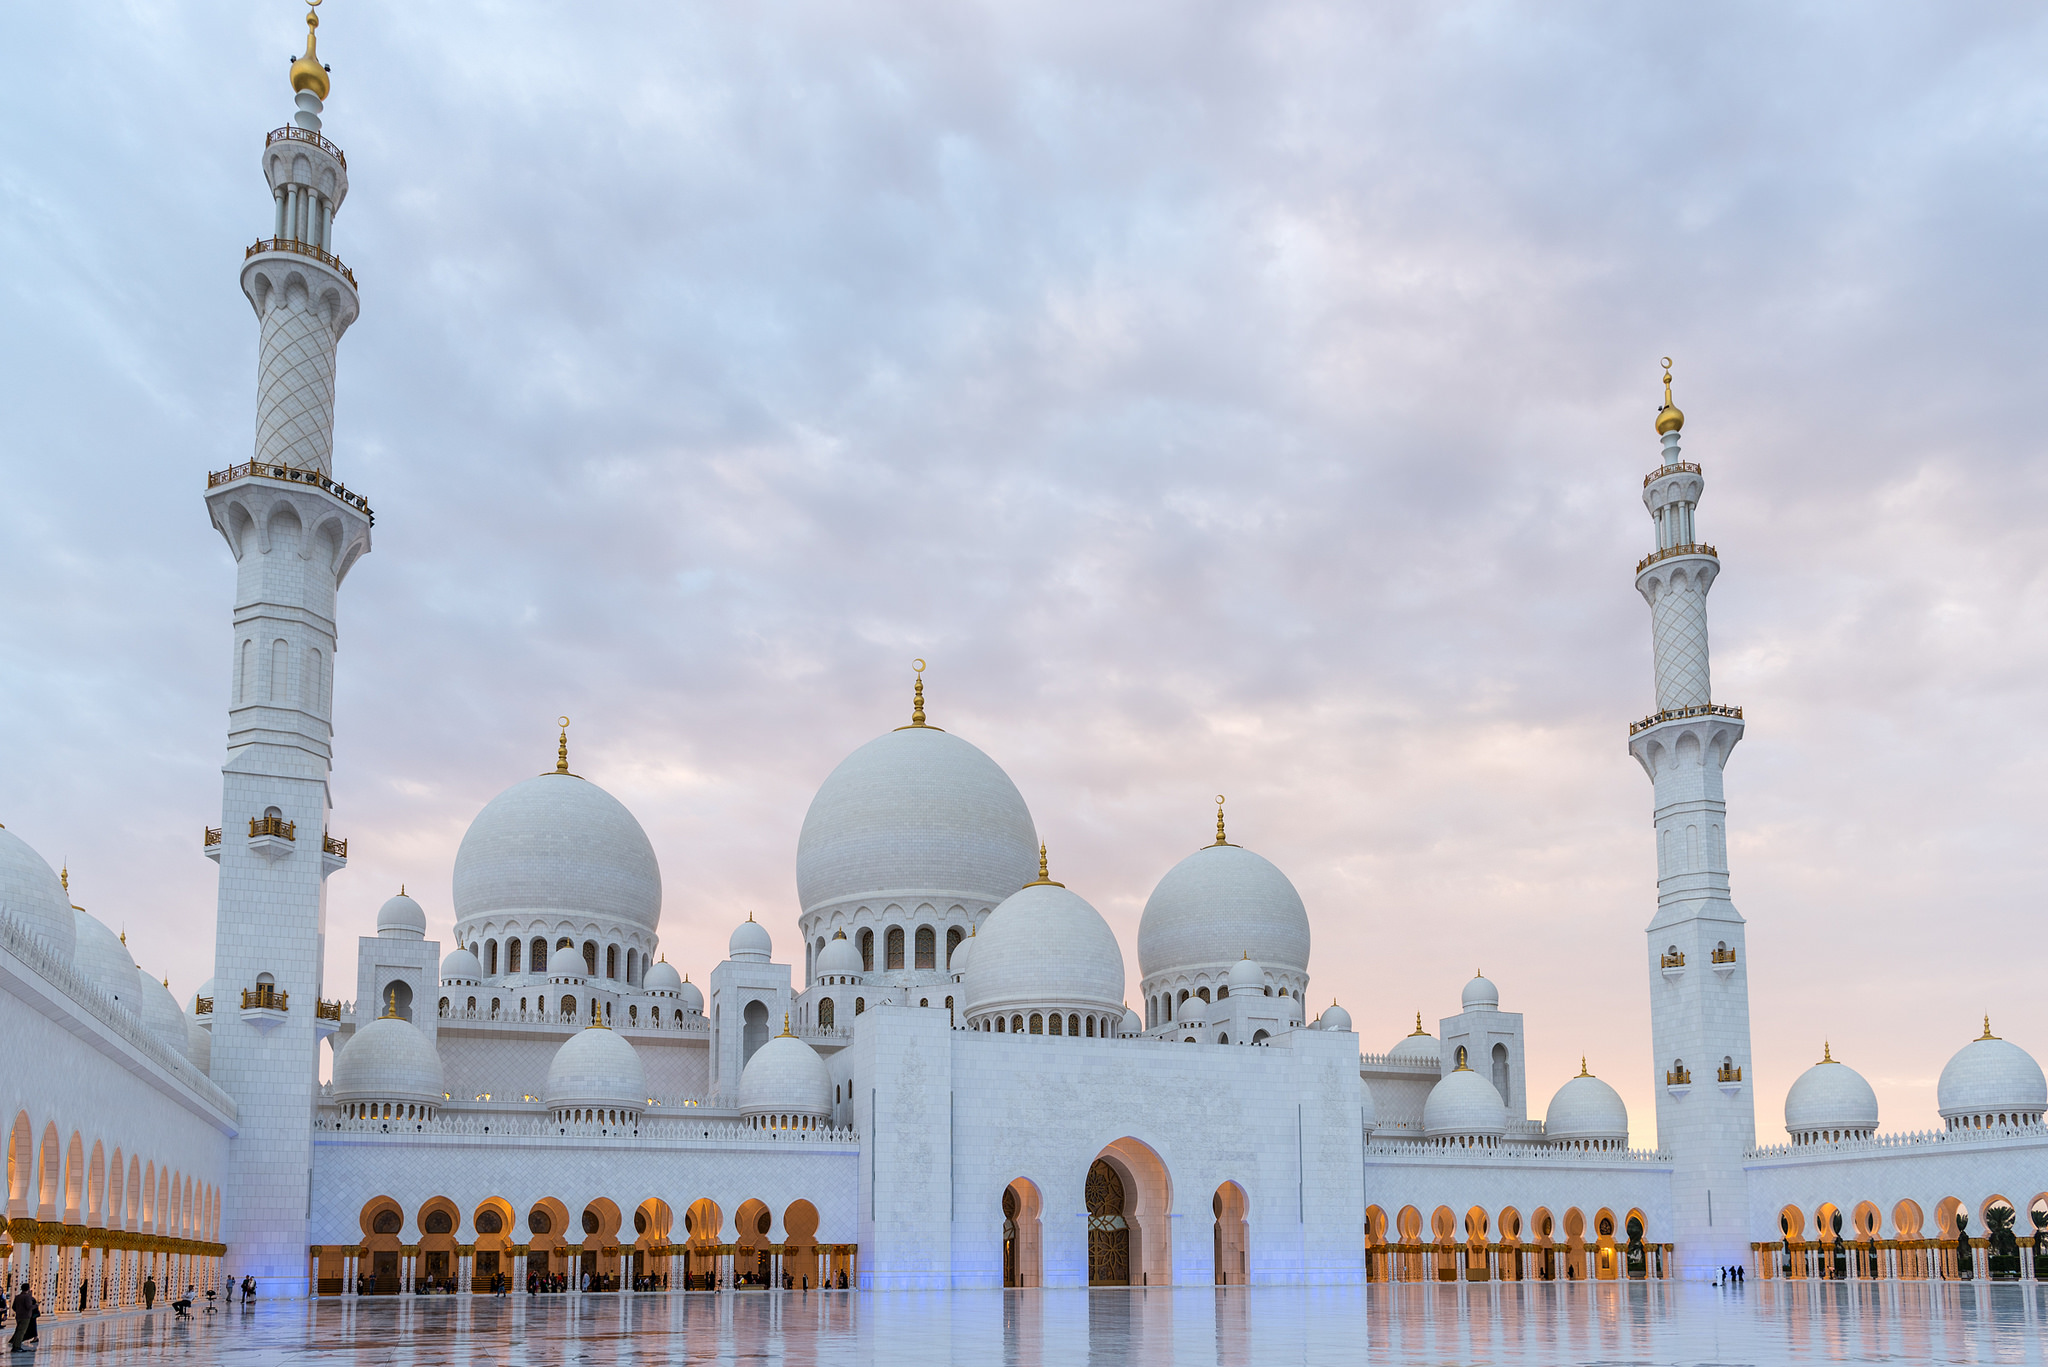 Location Tips: Video Production in Abu Dhabi